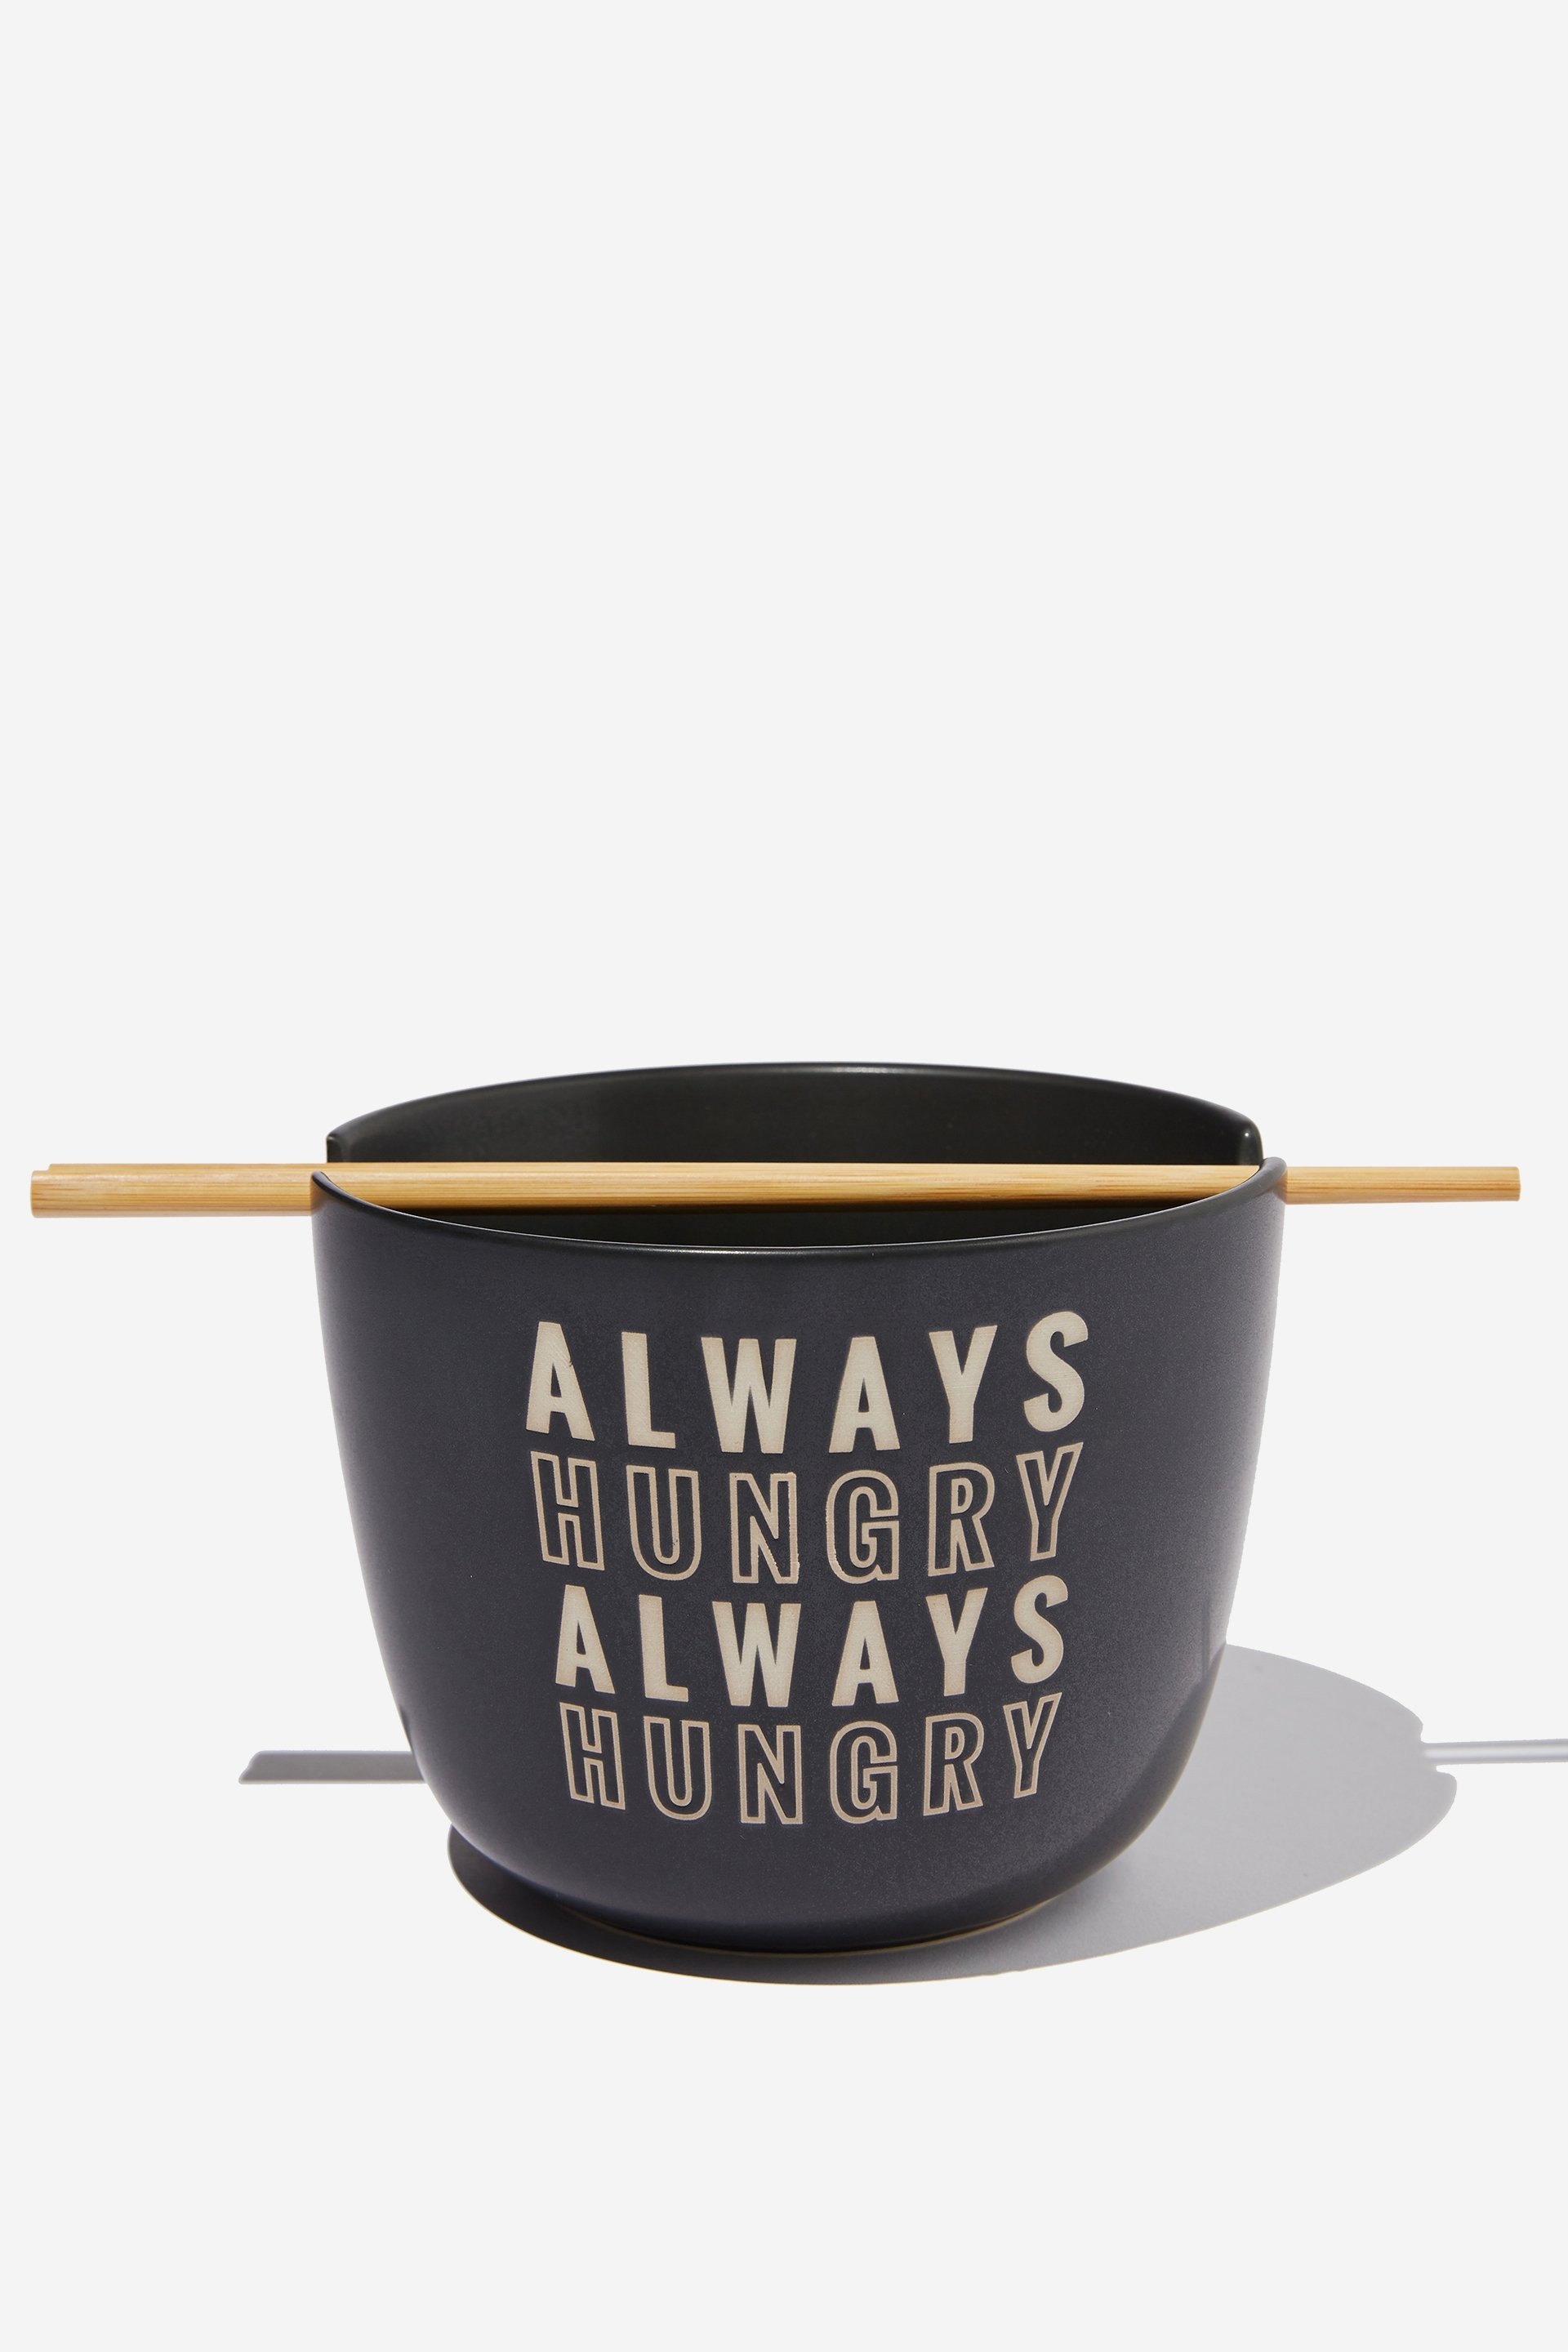 Typo - Feed Me Bowl - Always hungry always hungry black